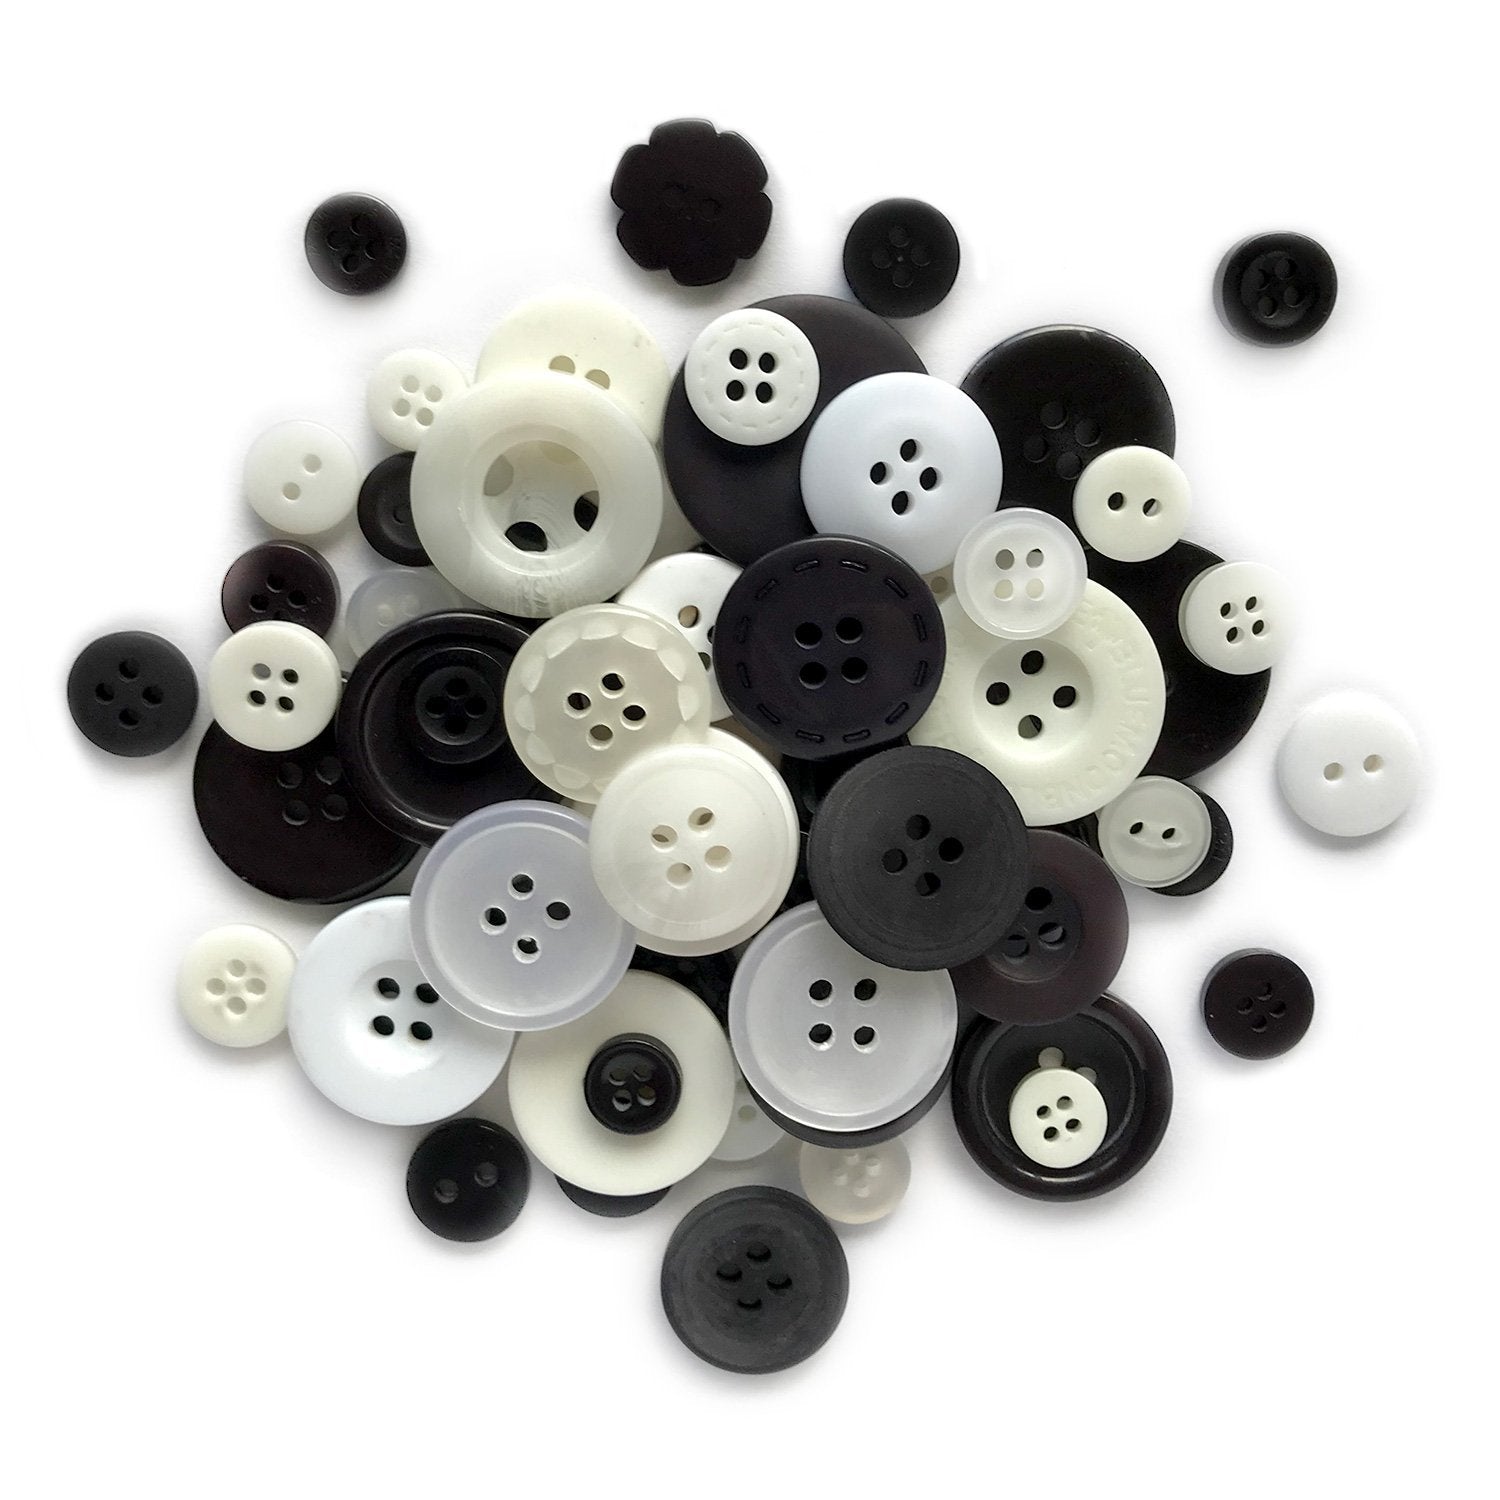 Black/White - BCB154 - Buttons Galore and More